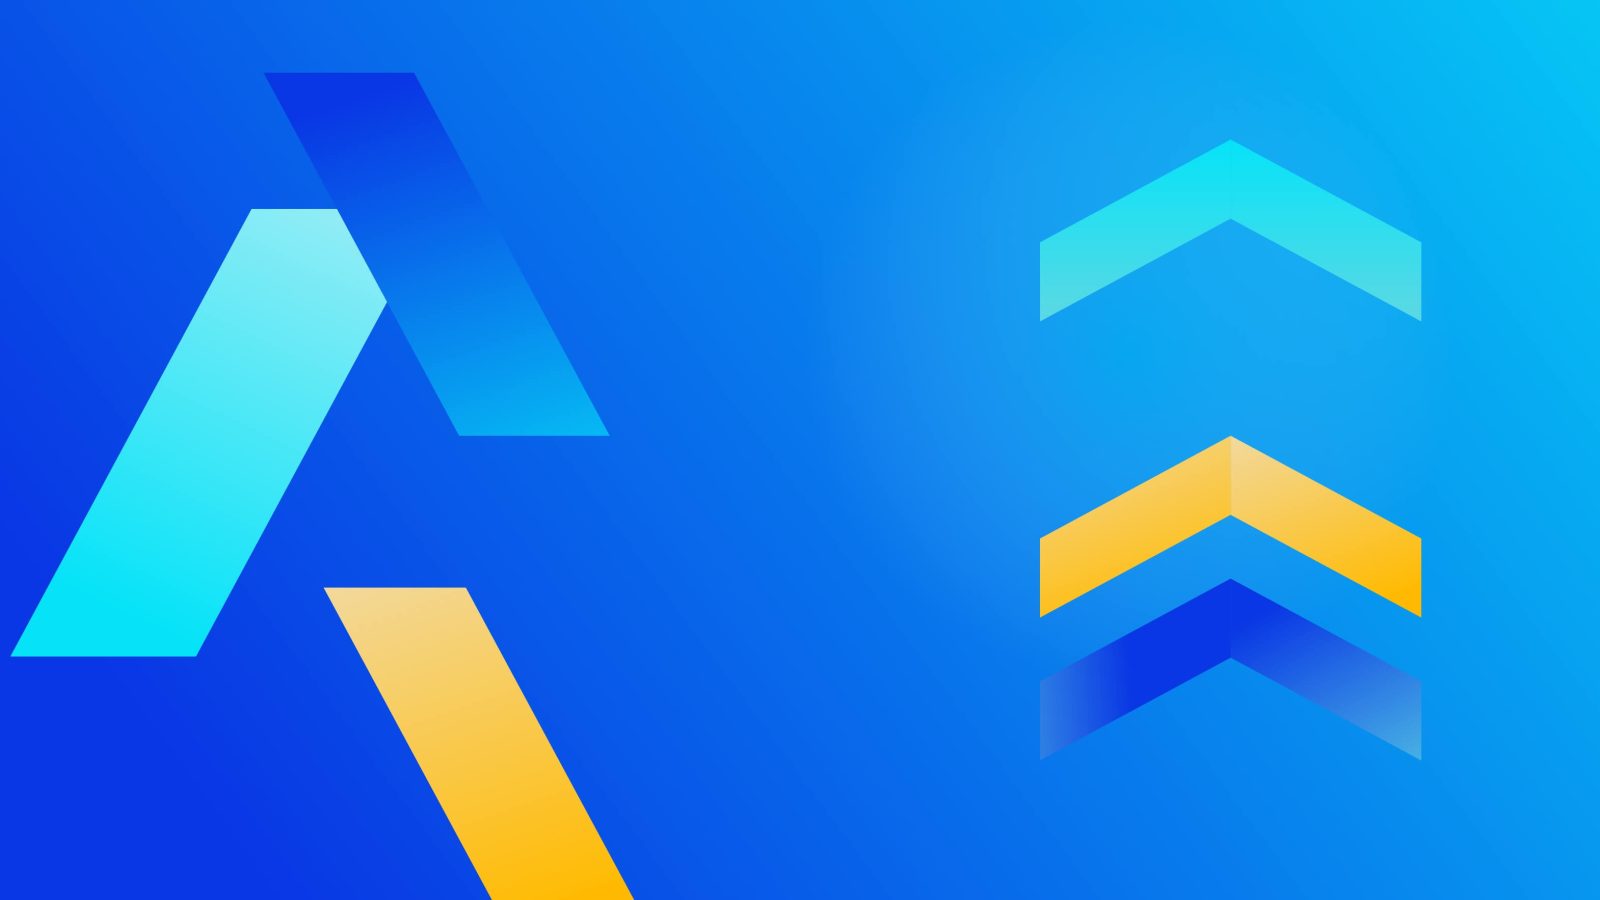 Abstract geometric background with sharp angled shapes in shades of blue, aqua, and yellow on a gradient blue background, ideal for Web Agency Bristol.